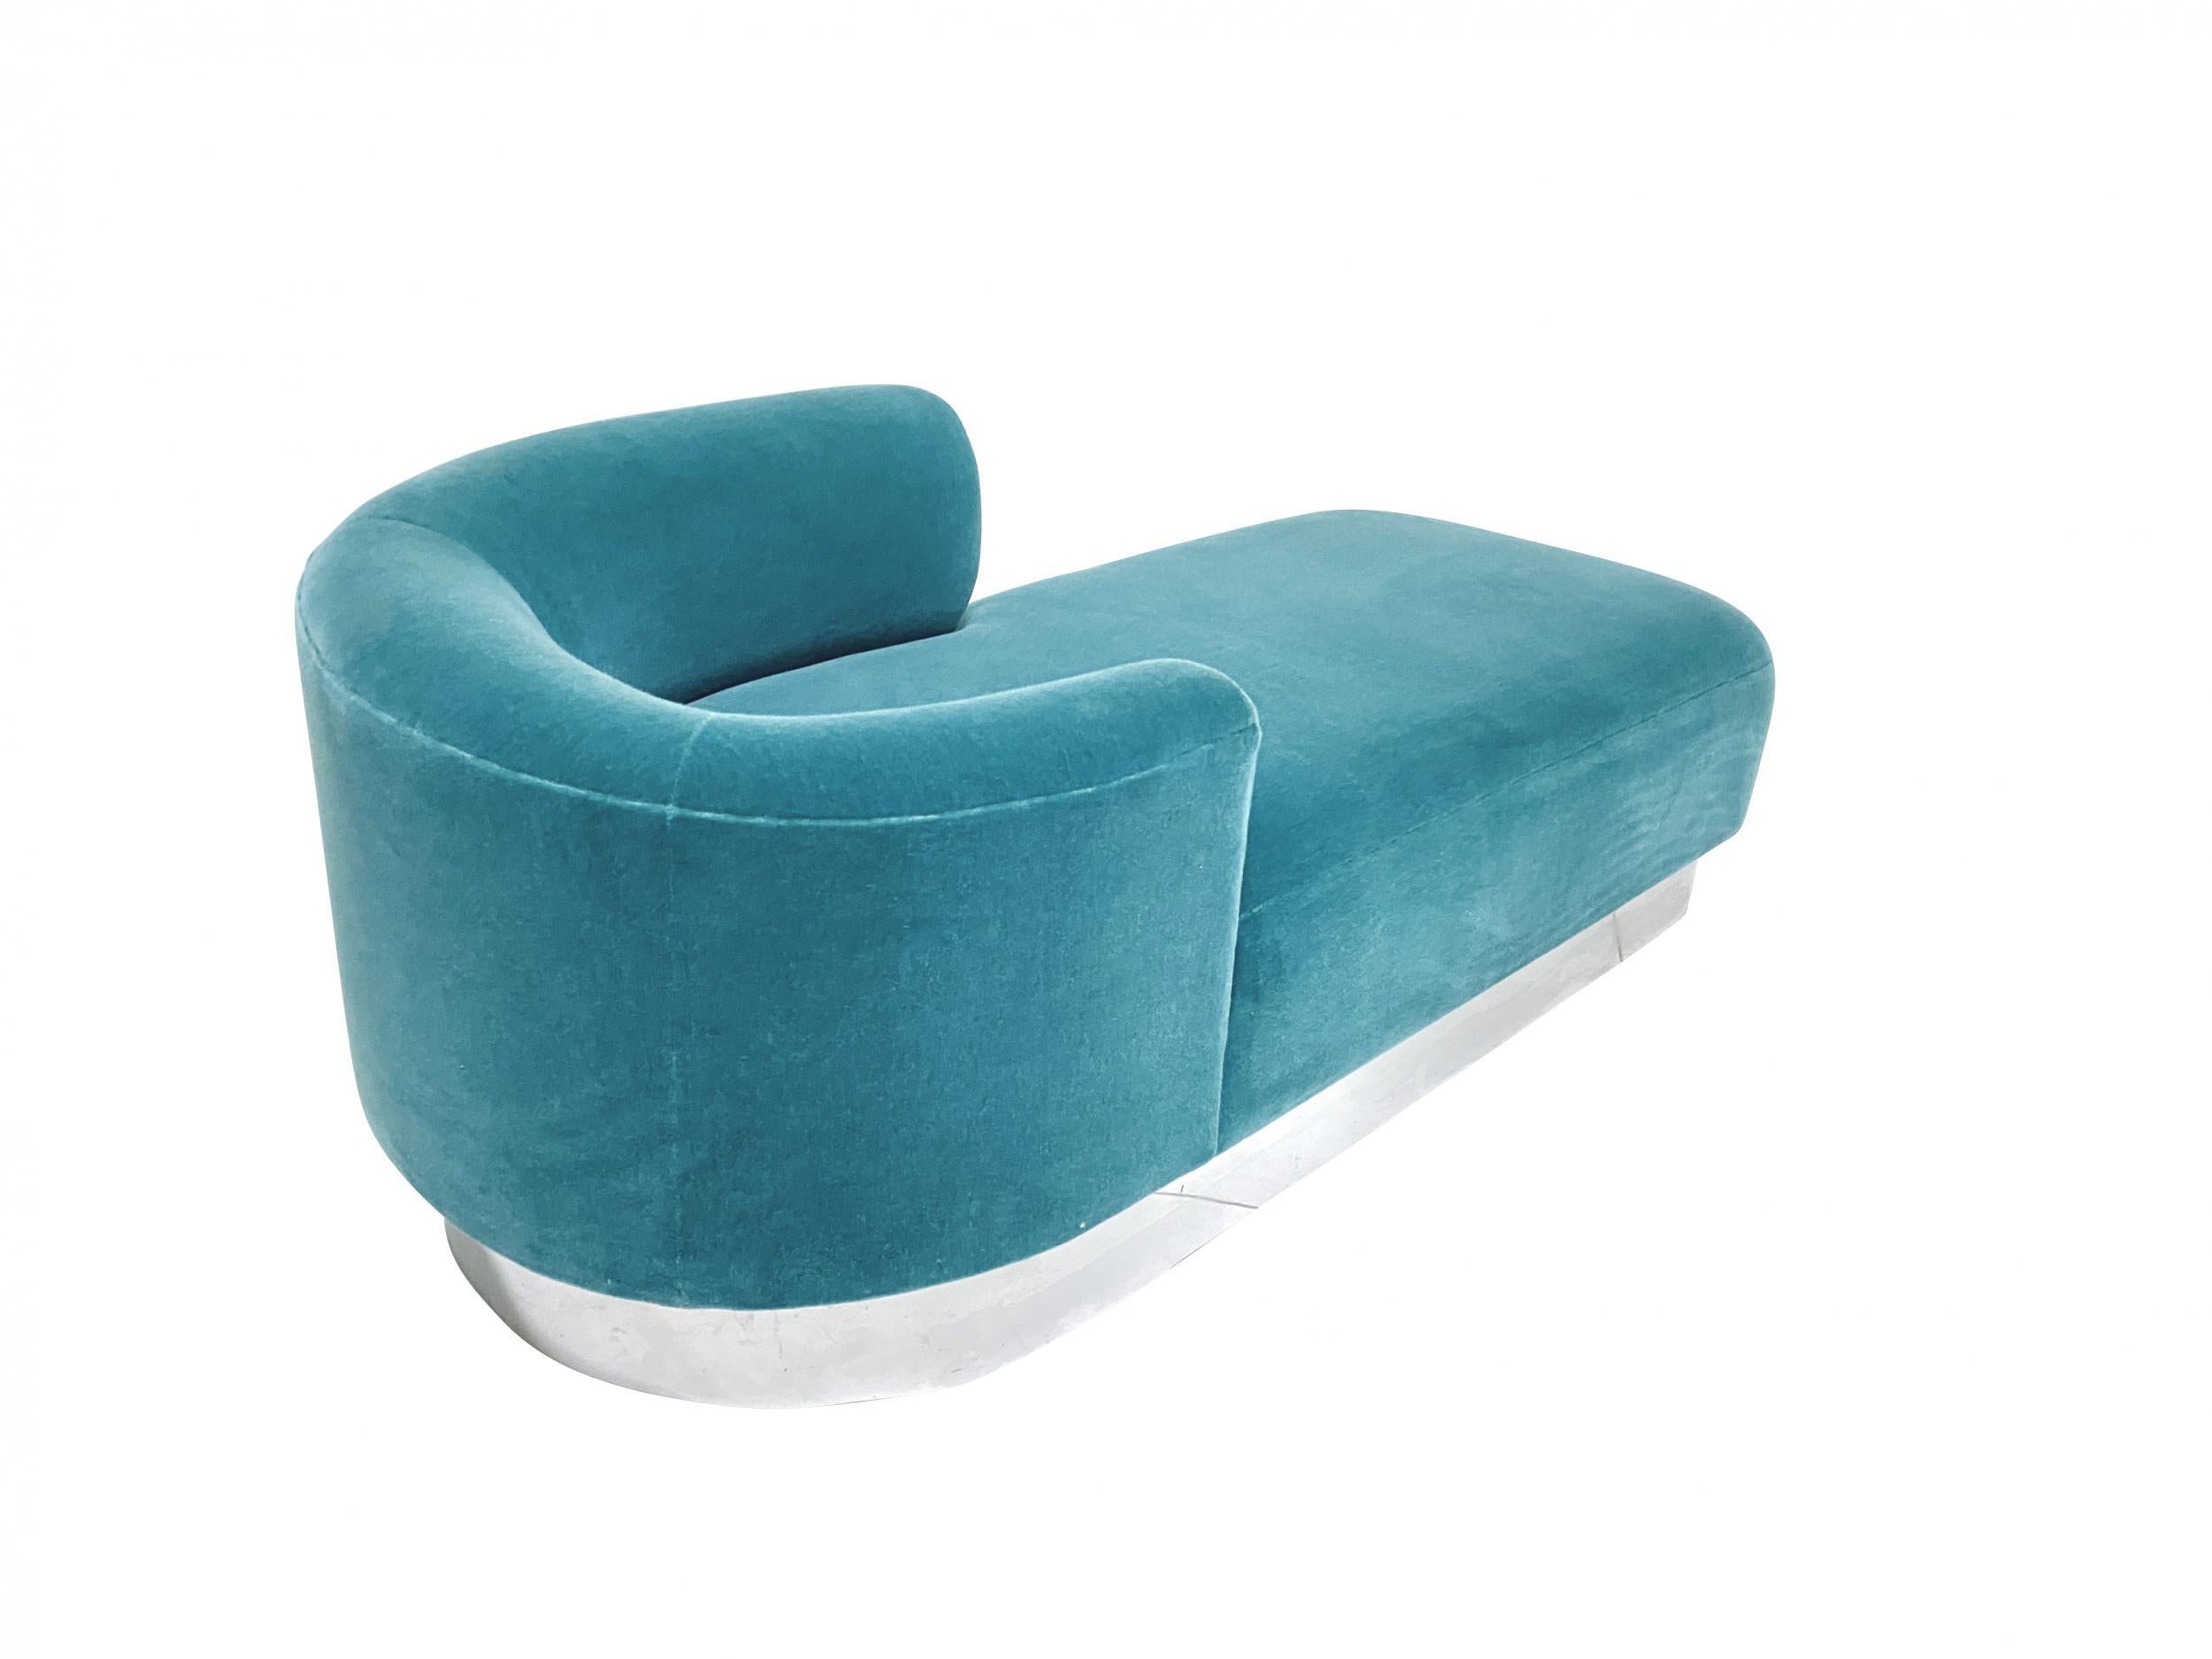 Steve Chase chaise lounge sofa on chrome base. Fully restored and reupholstered in blue mohair.